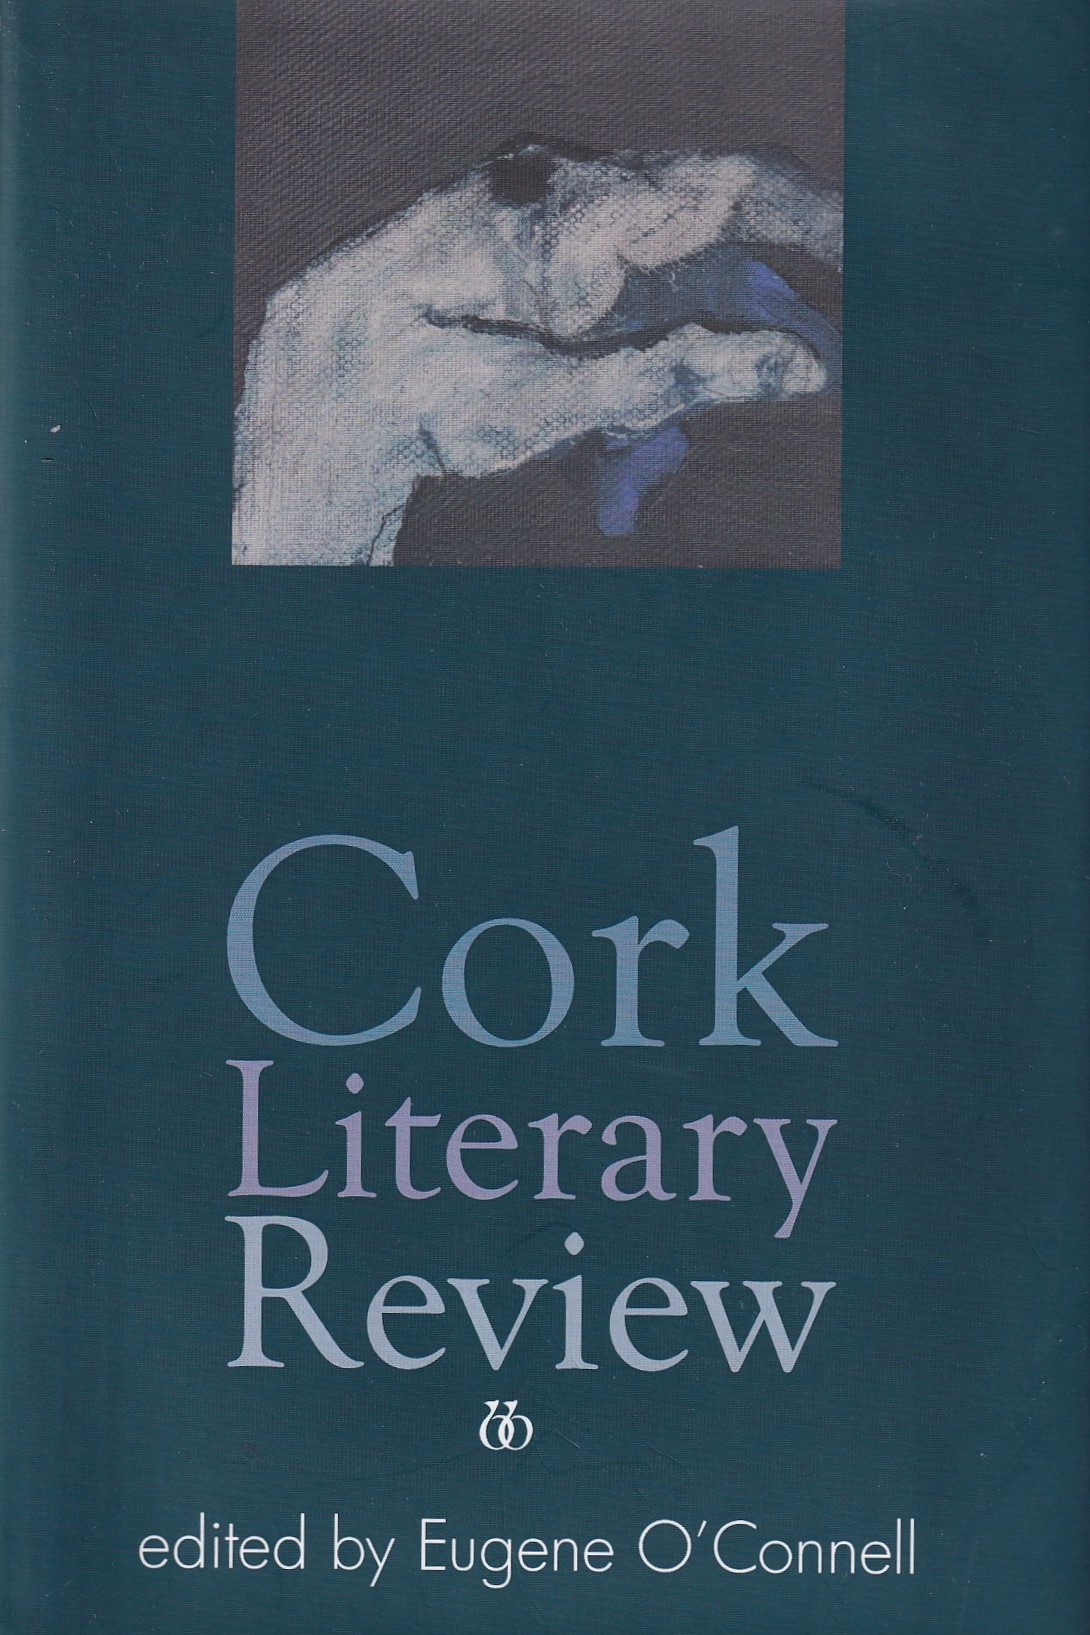 Cork Literary Review No. XIV | Eugene O'Connell (ed.) | Charlie Byrne's